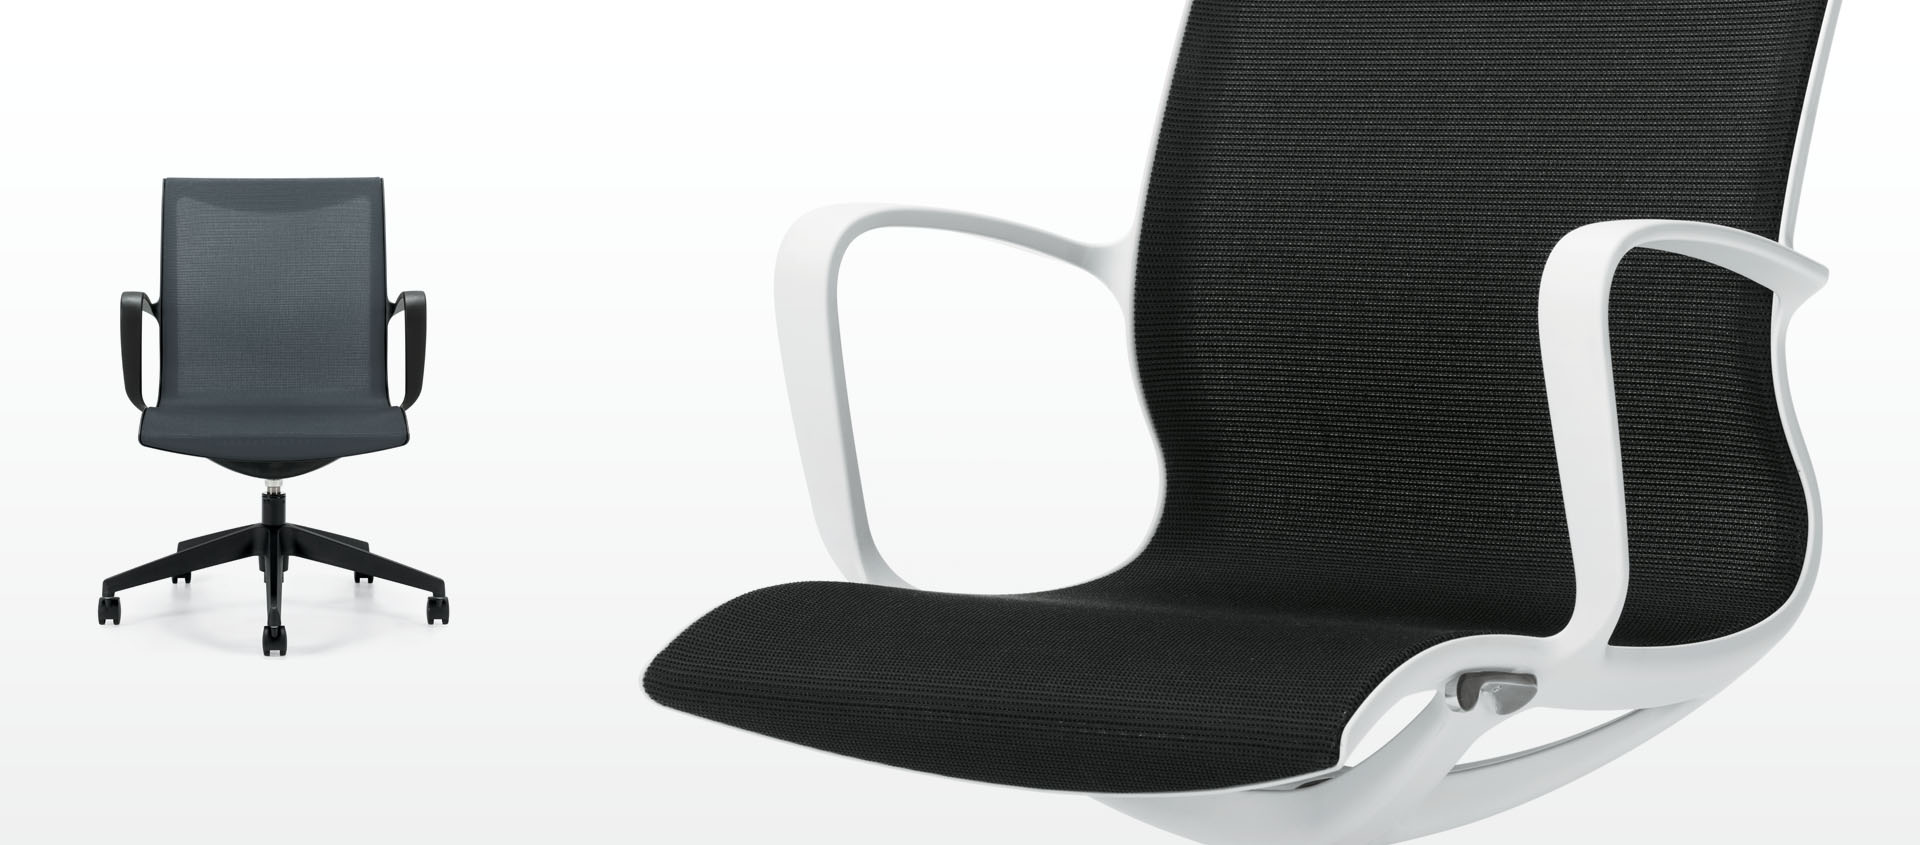 Image of black mesh conference chair